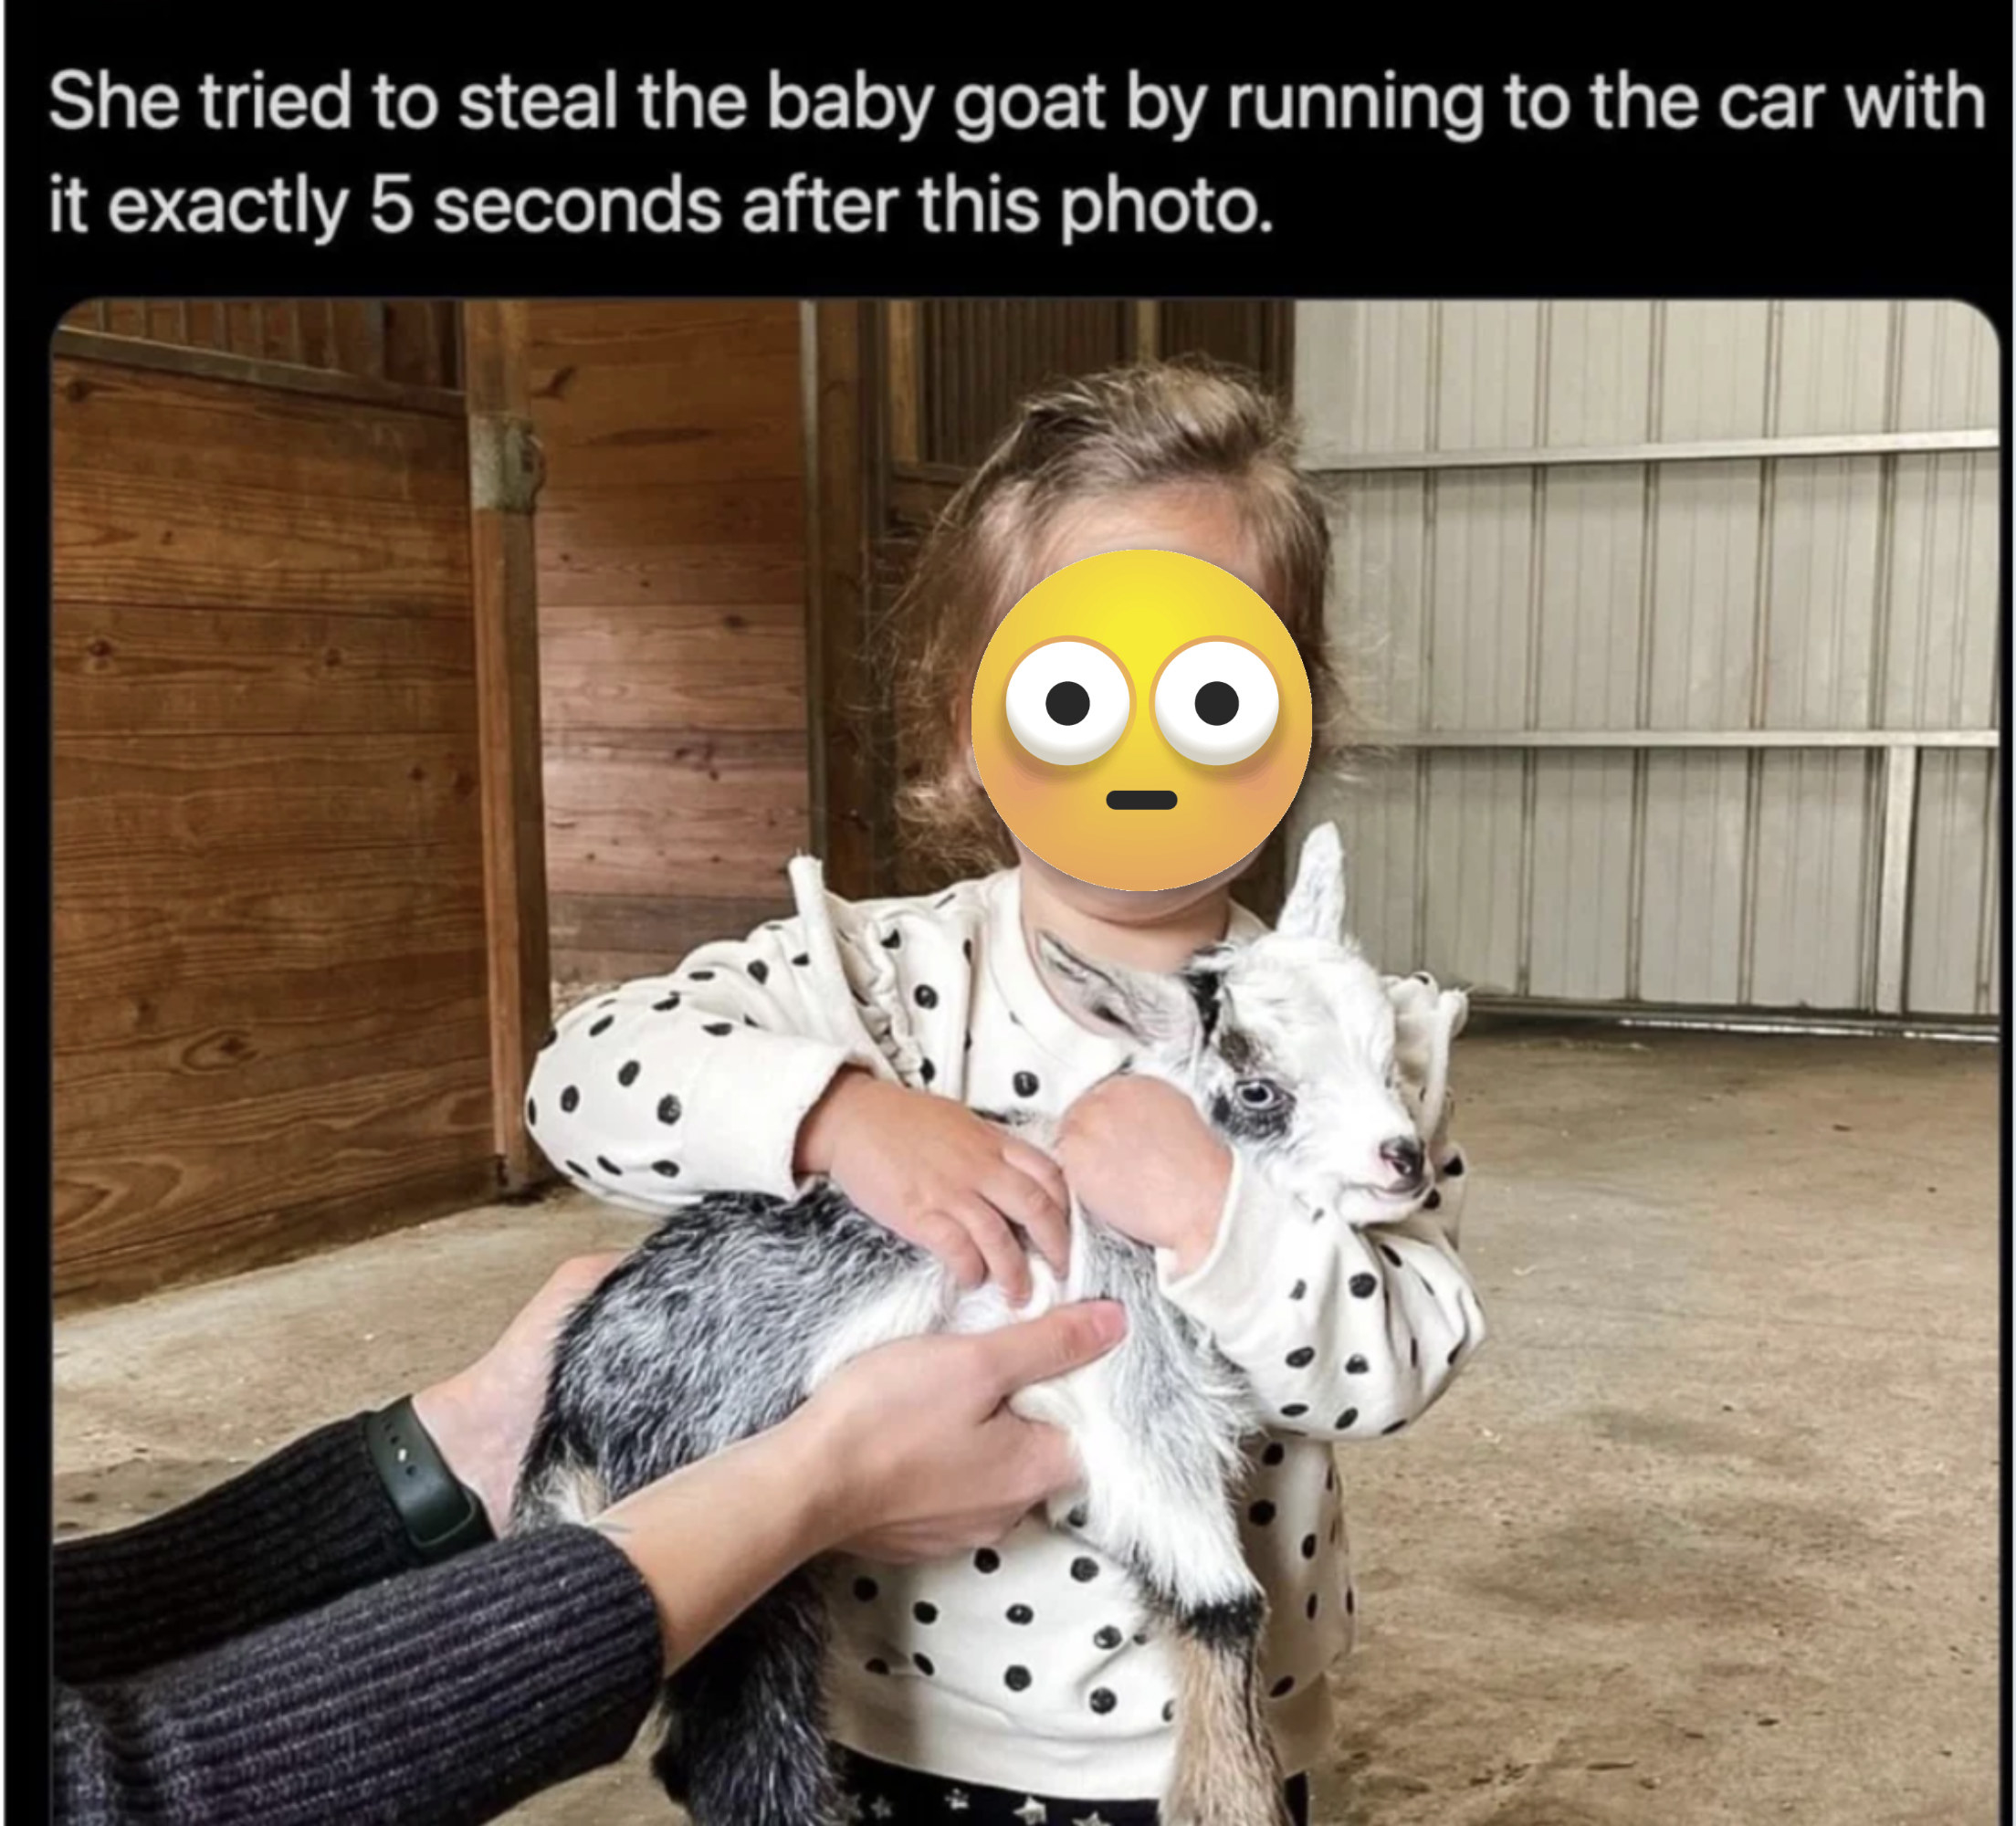 Child holding a baby goat with the words &quot;She tried to steal the baby goat by running to the car with it exactly 5 seconds after this photo&quot;